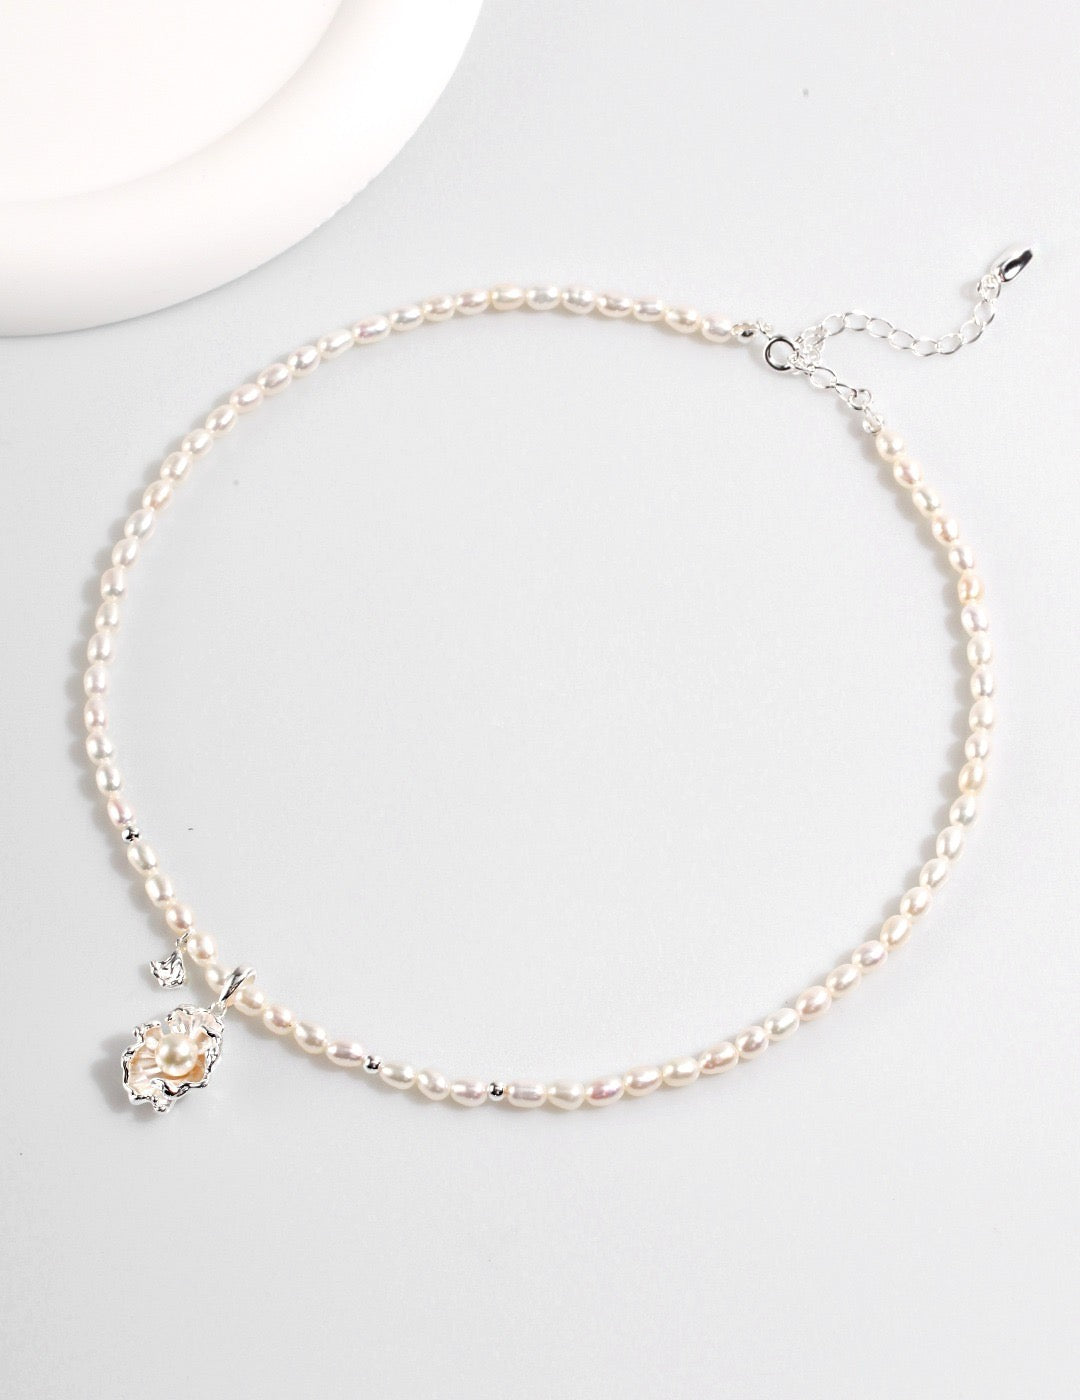 Wave-shaped natural freshwater pearl necklace